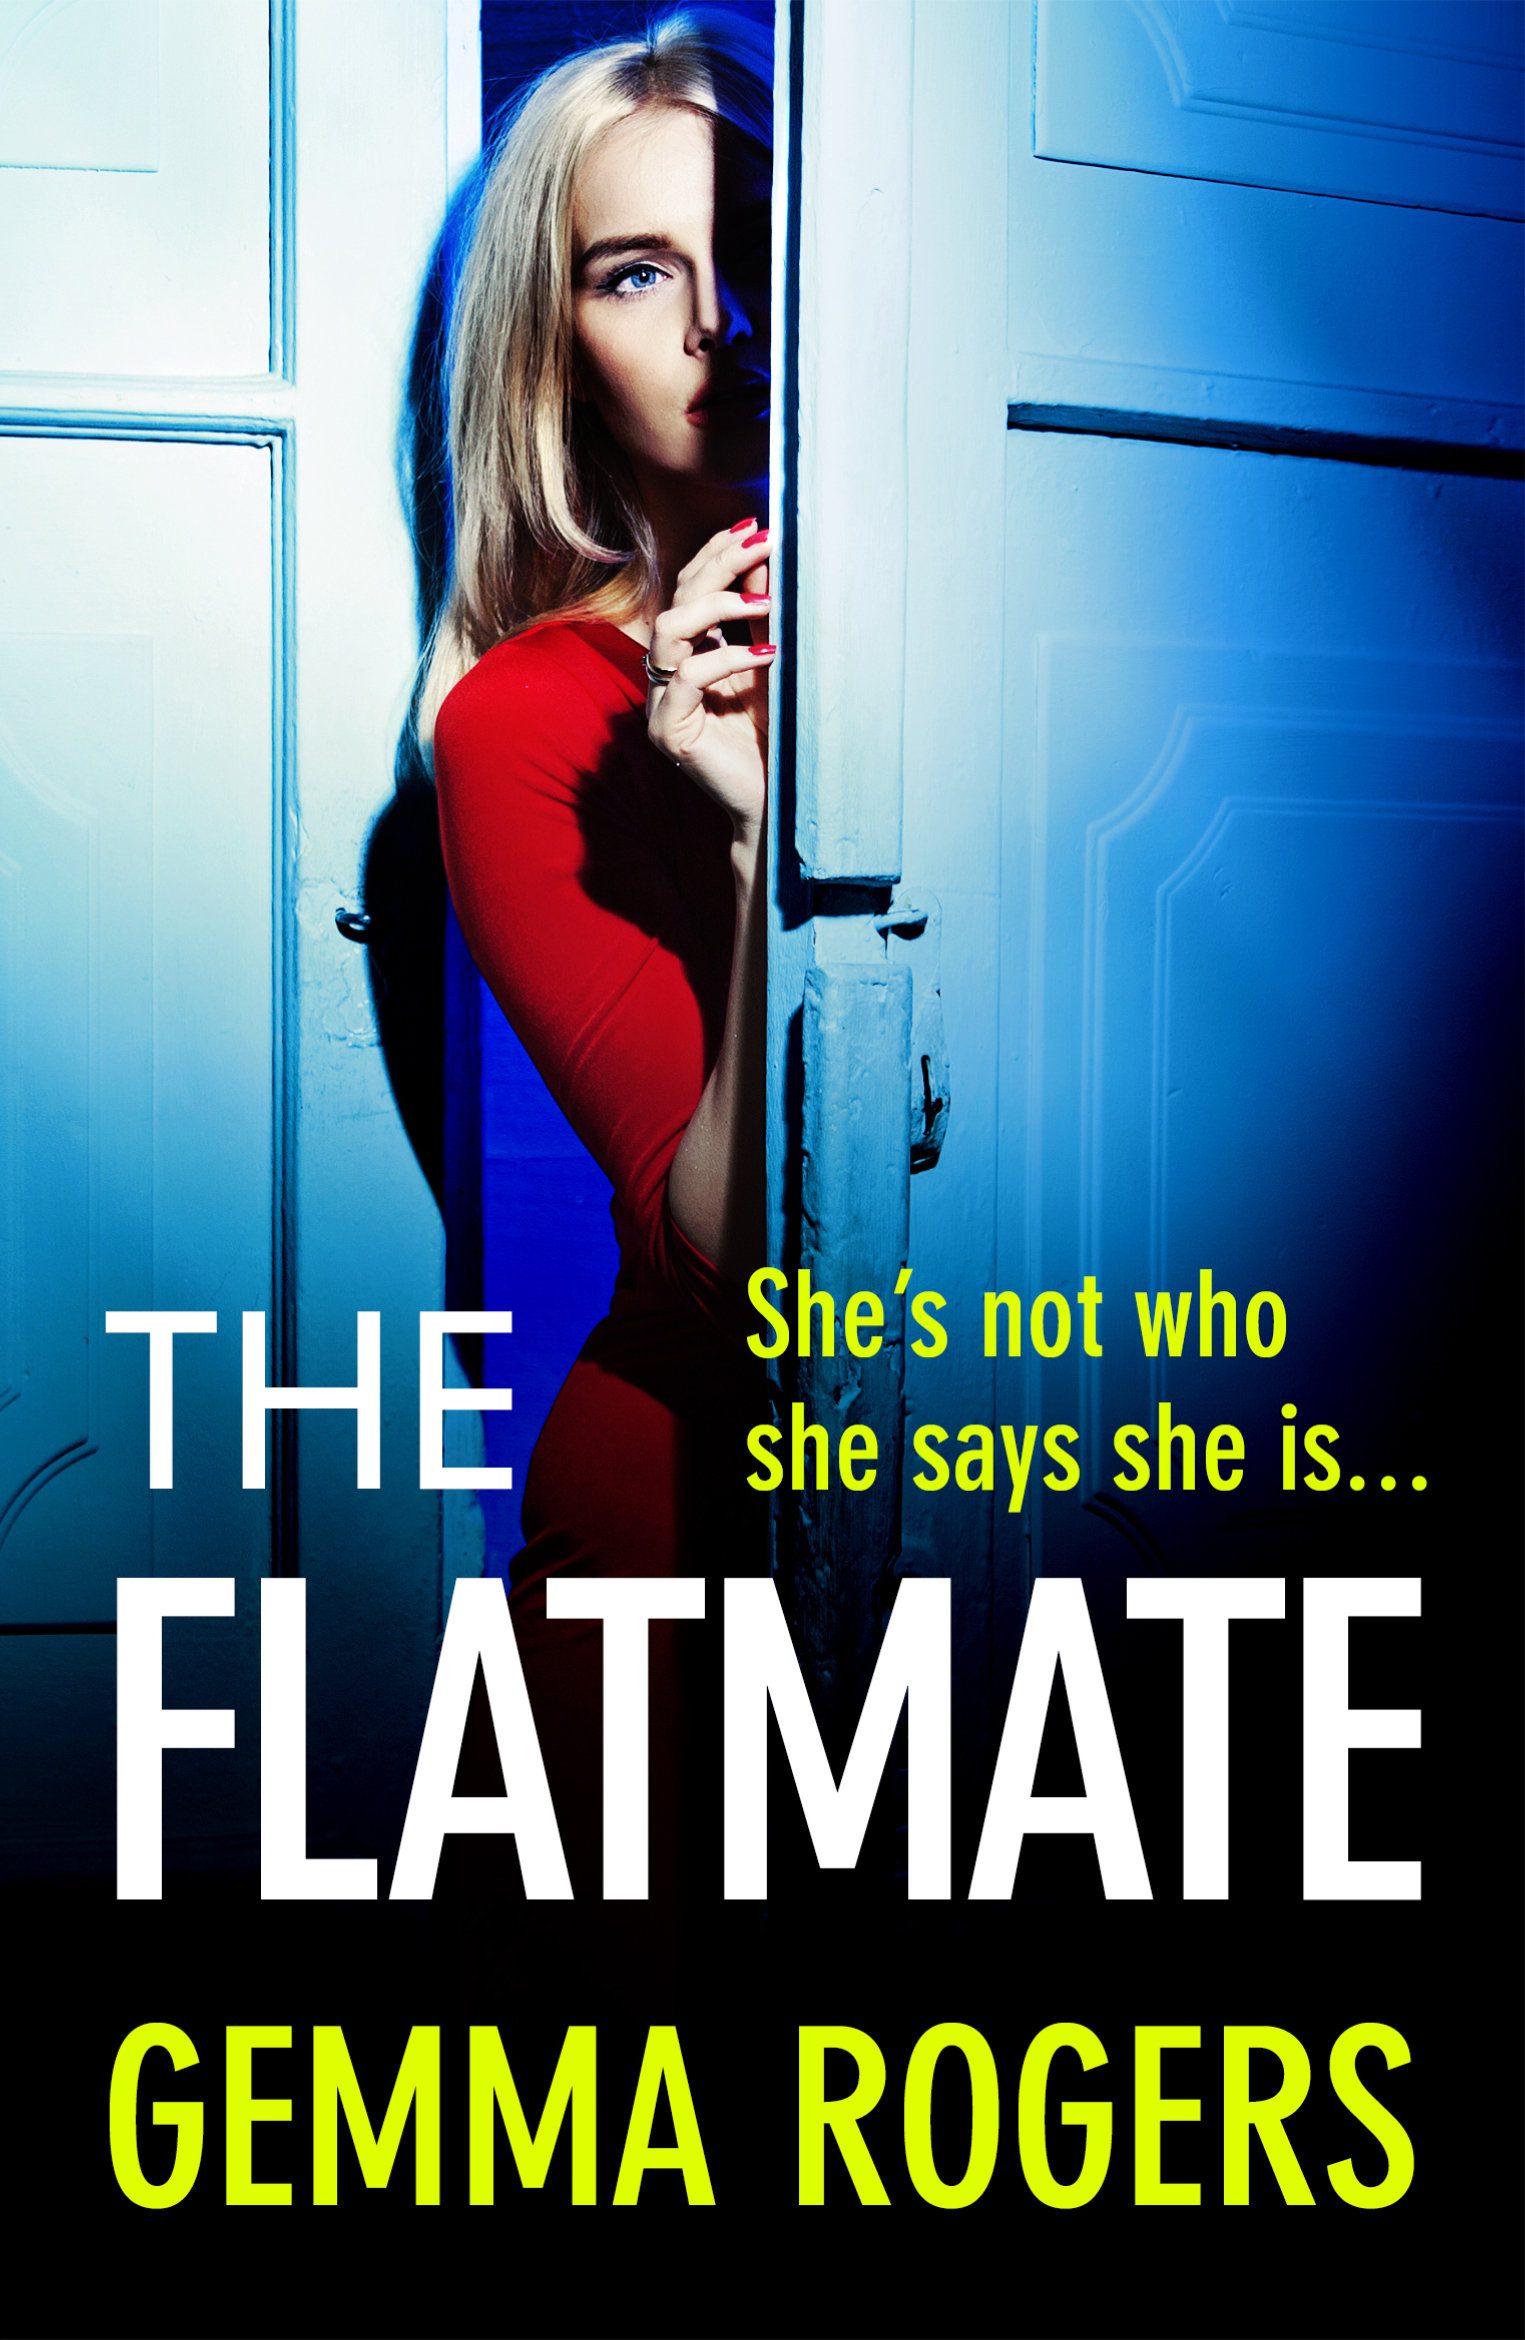 The Flatmate book cover